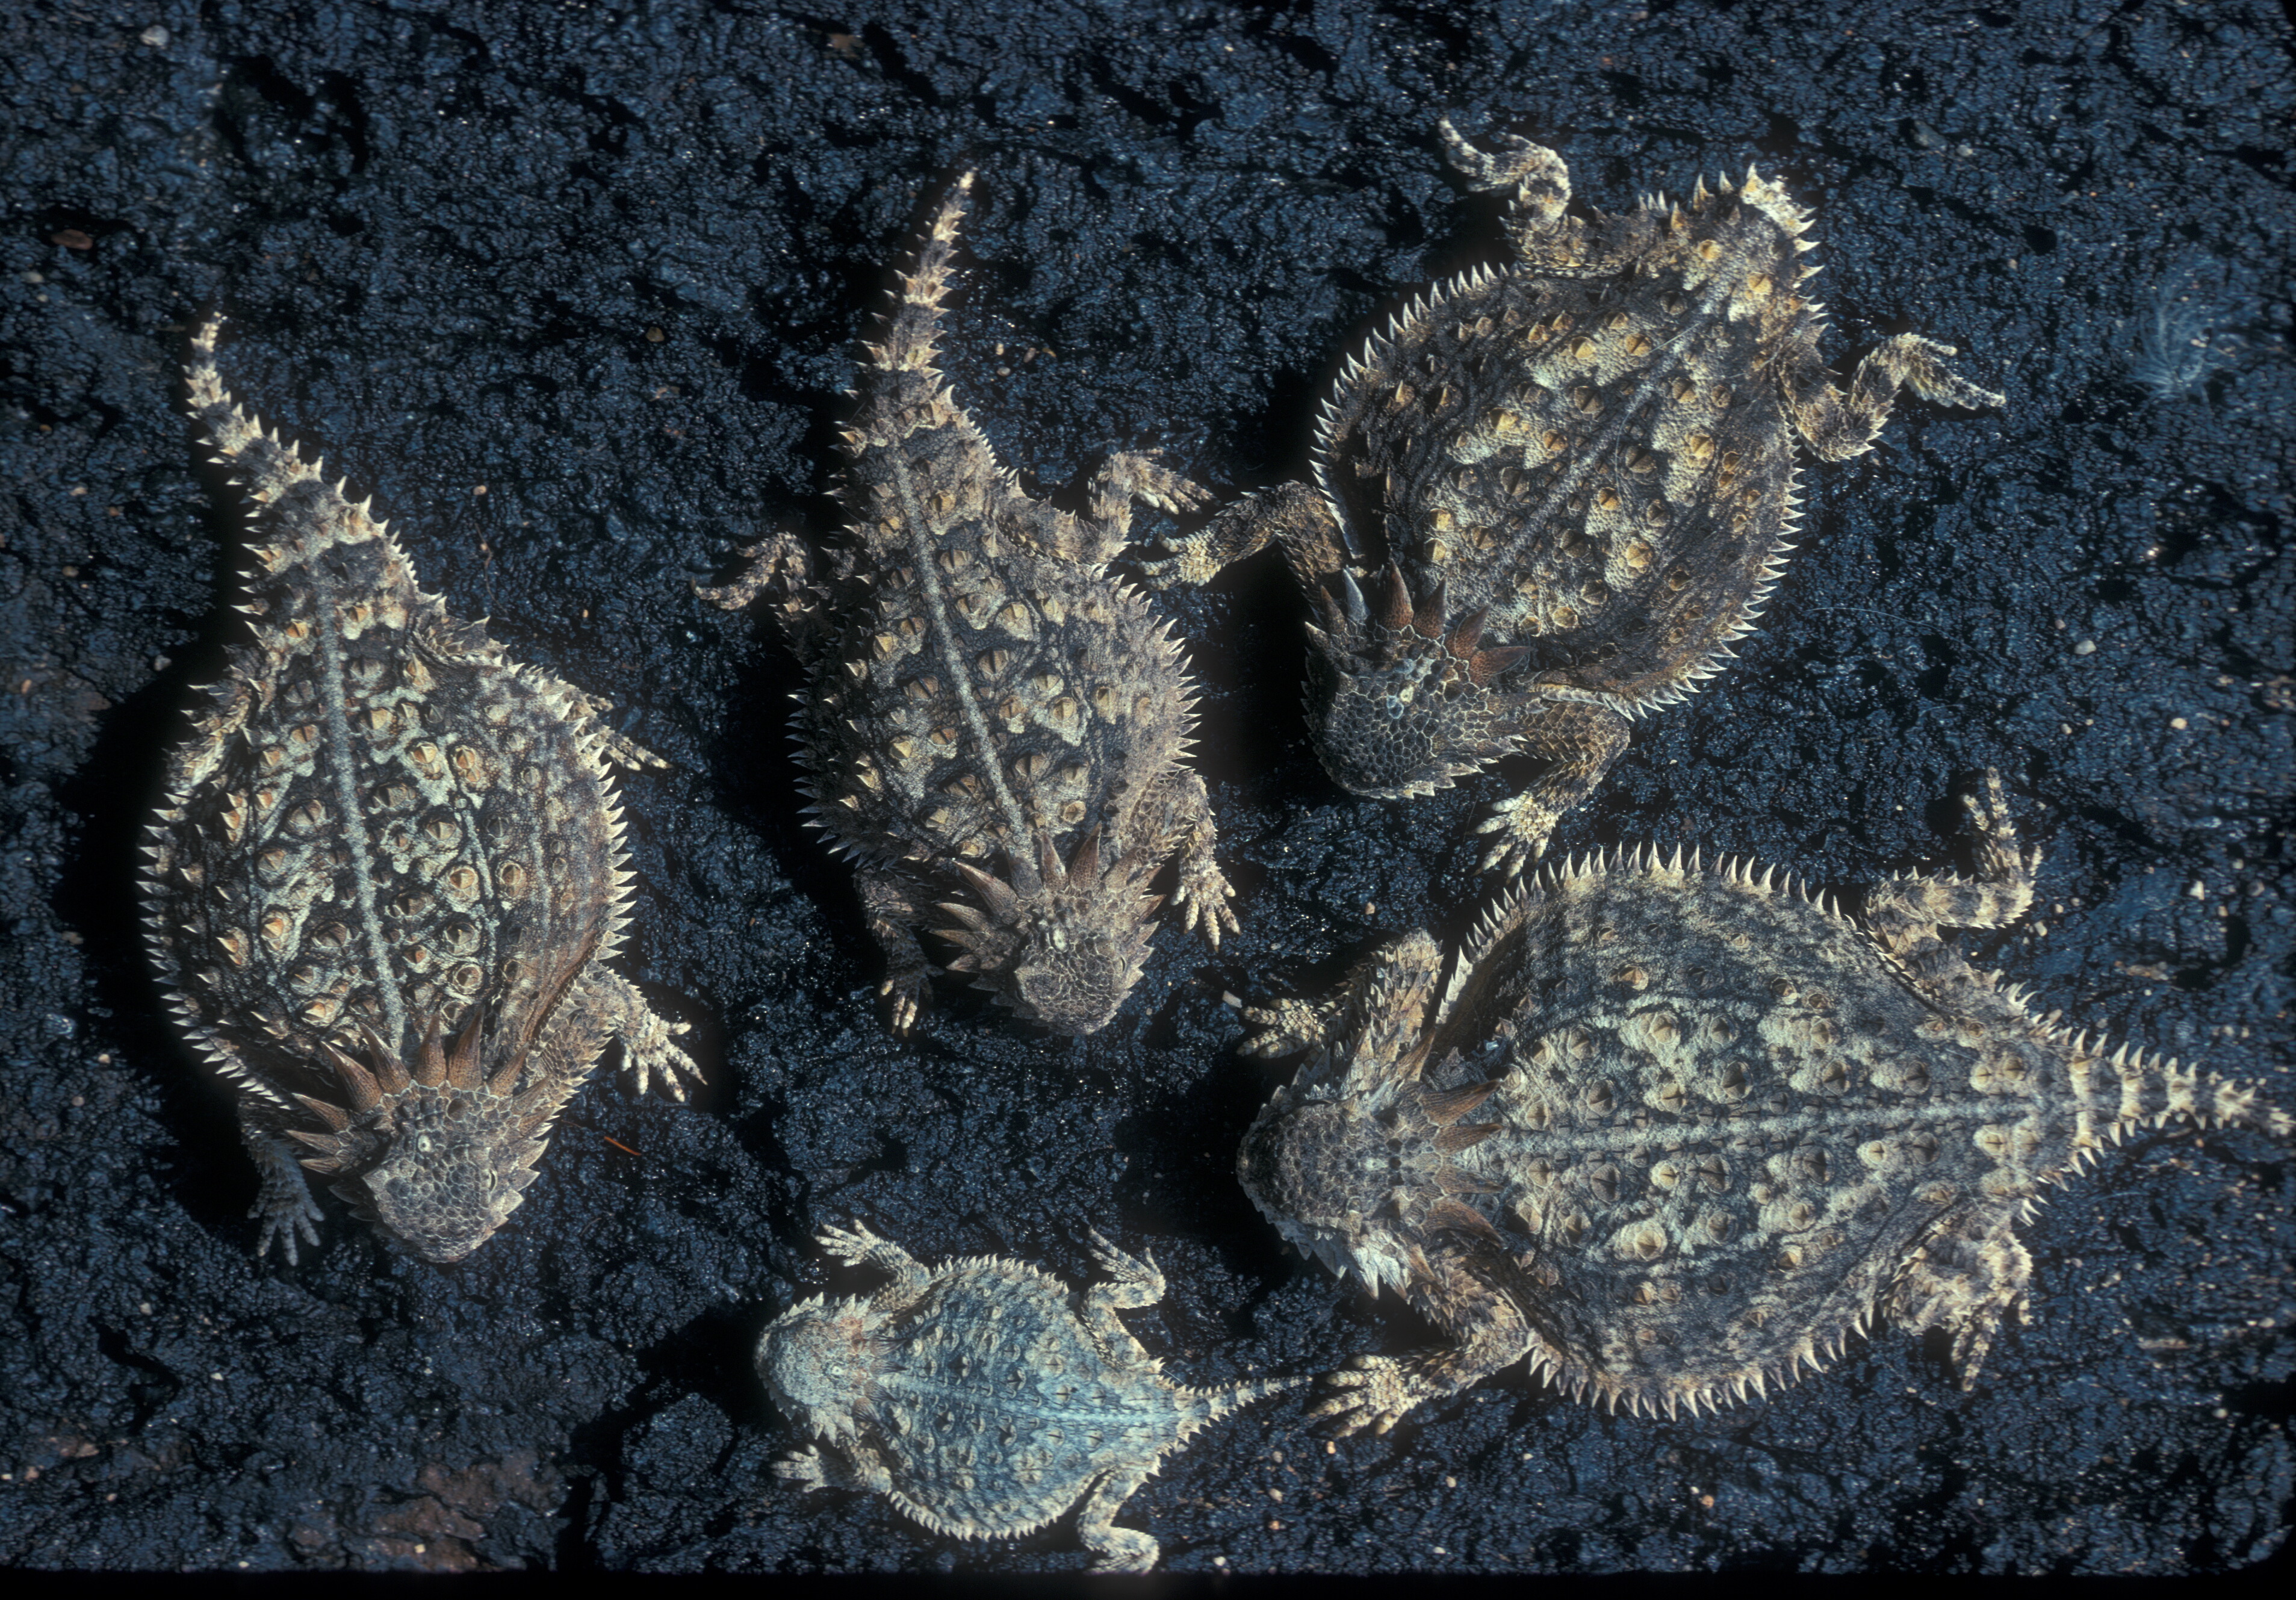 A group of Phrynosoma solare, or regal horned lizards.